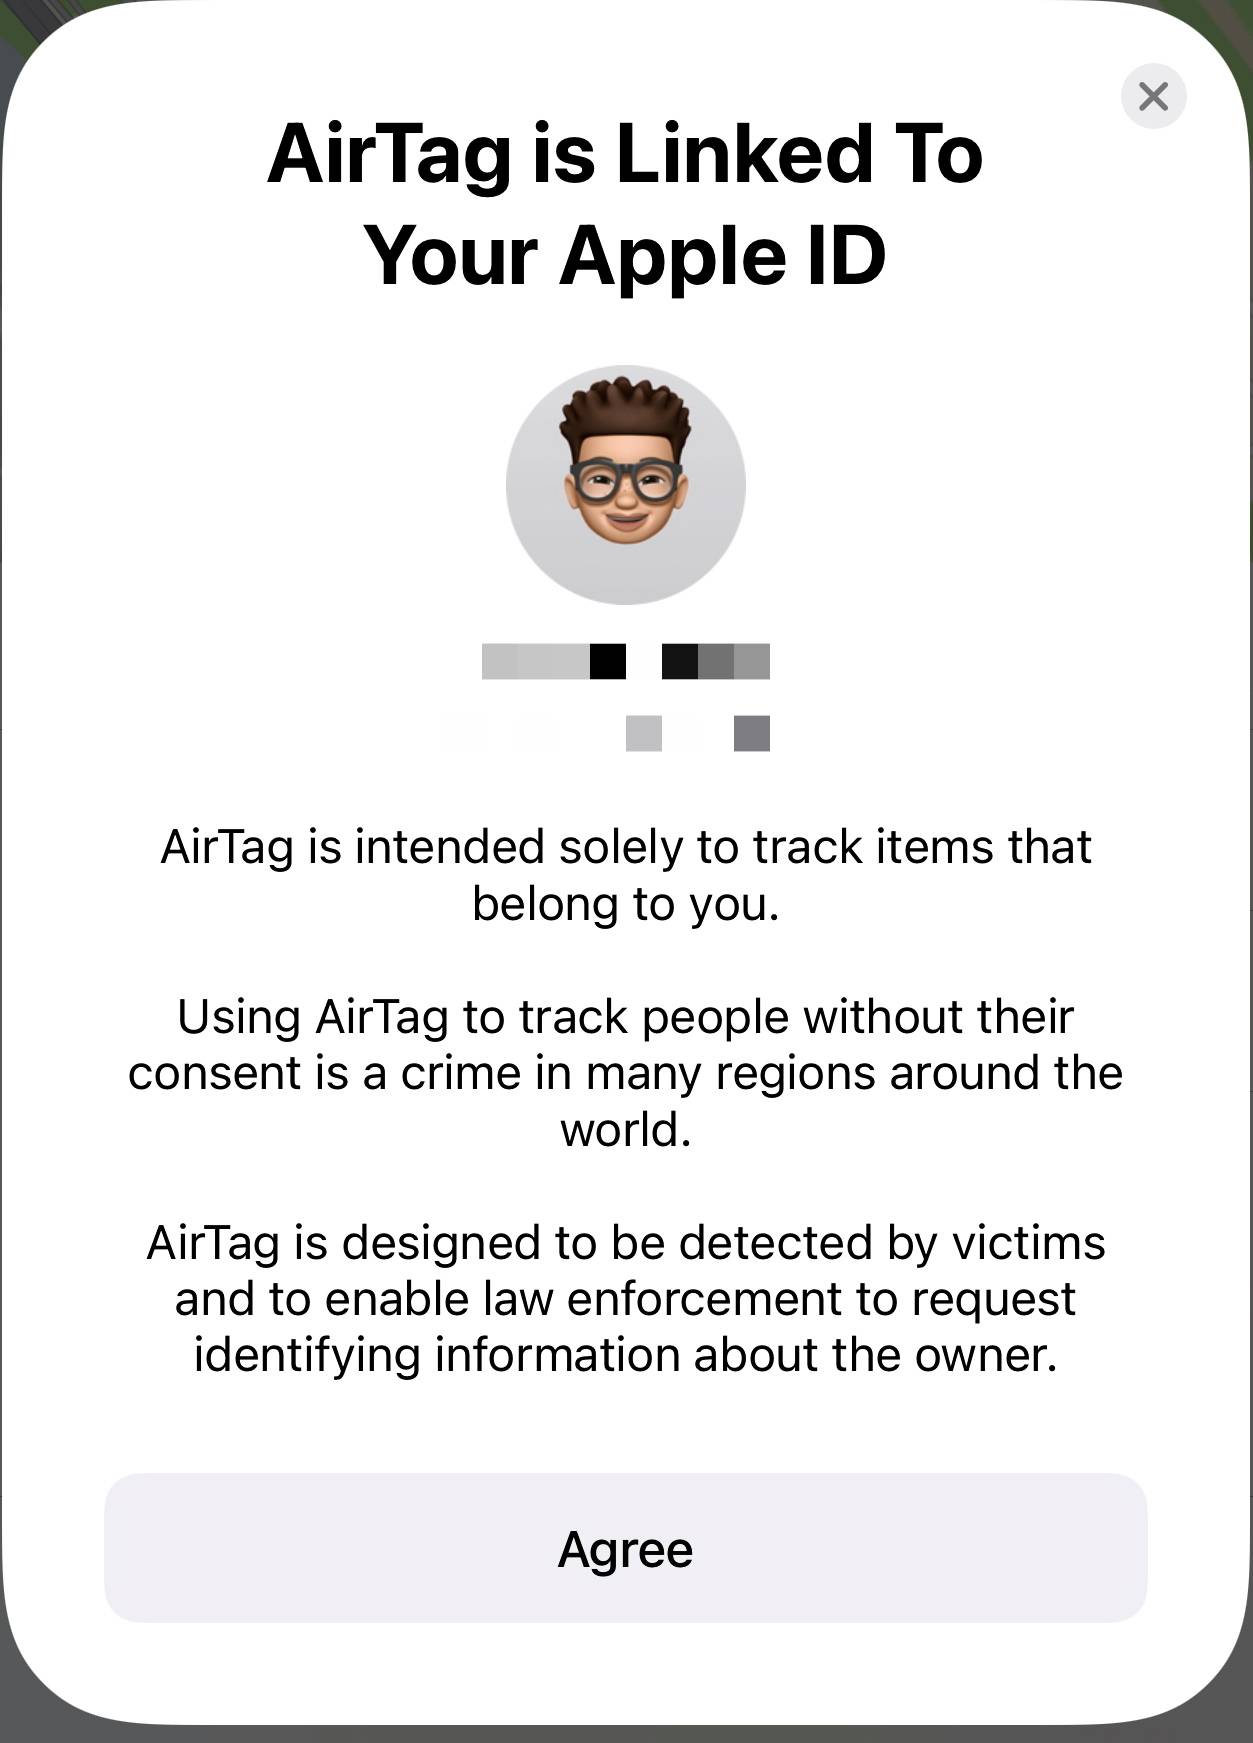 AirTag-is-linked-to-your-Apple-ID-iOS-15.4-beta-4